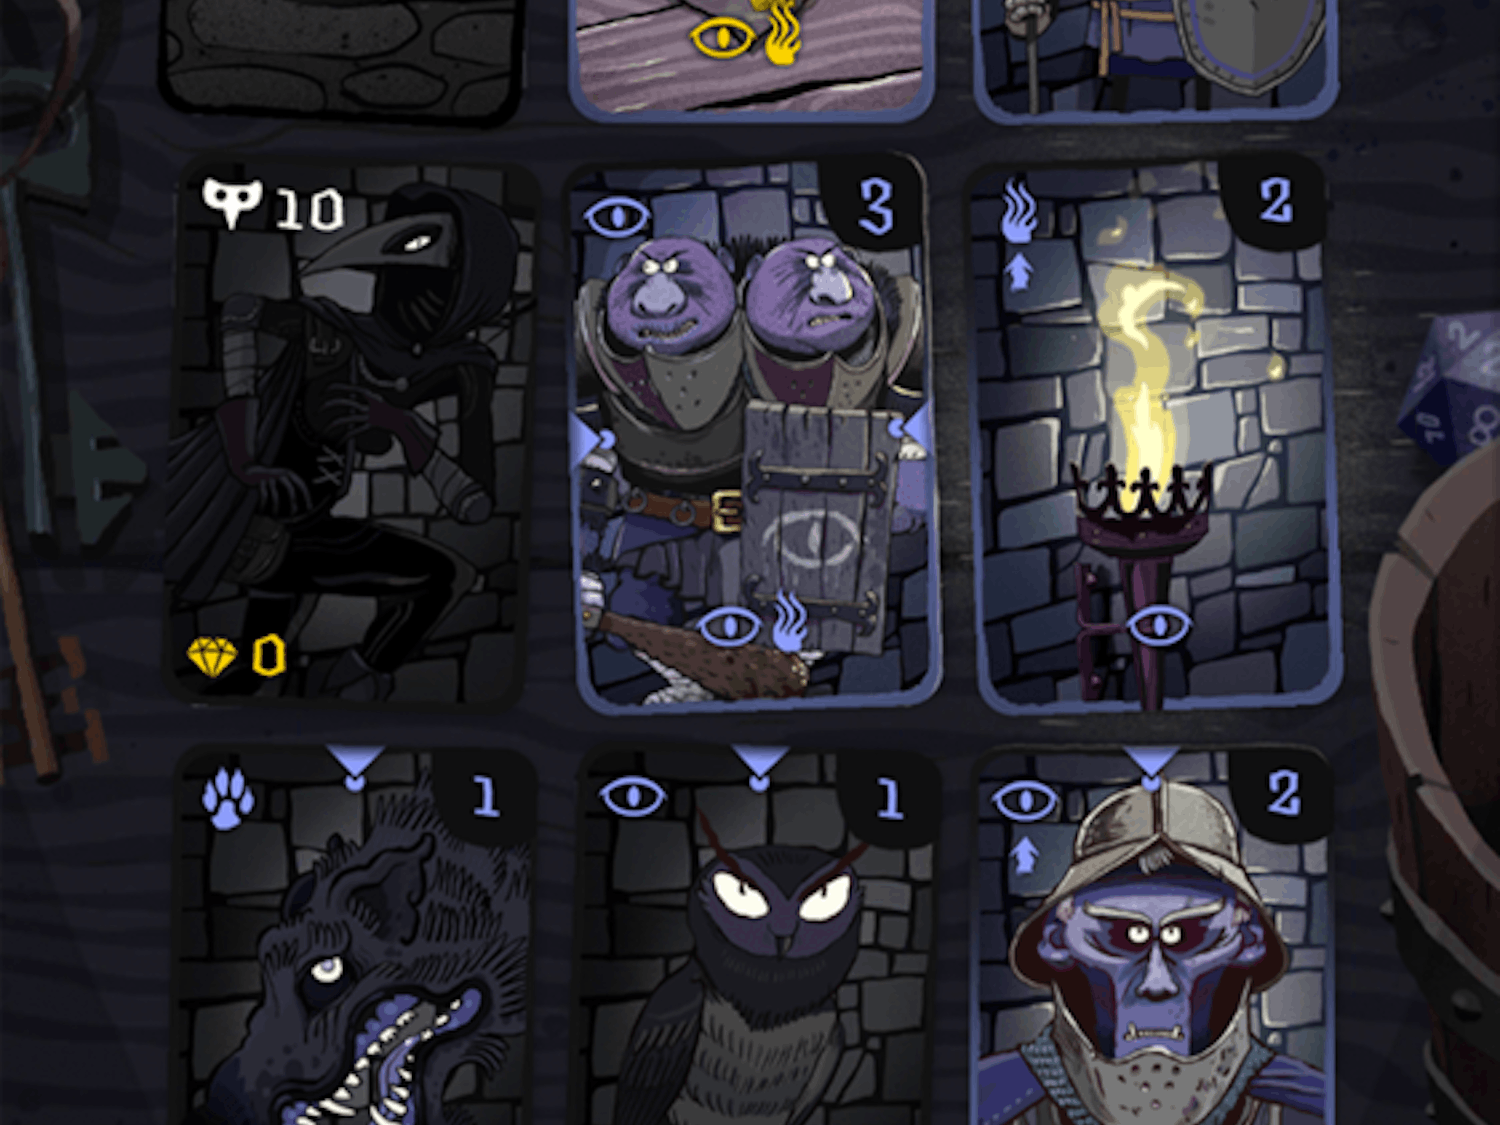 'Card Thief' challenges players to fill their pockets without getting caught. 